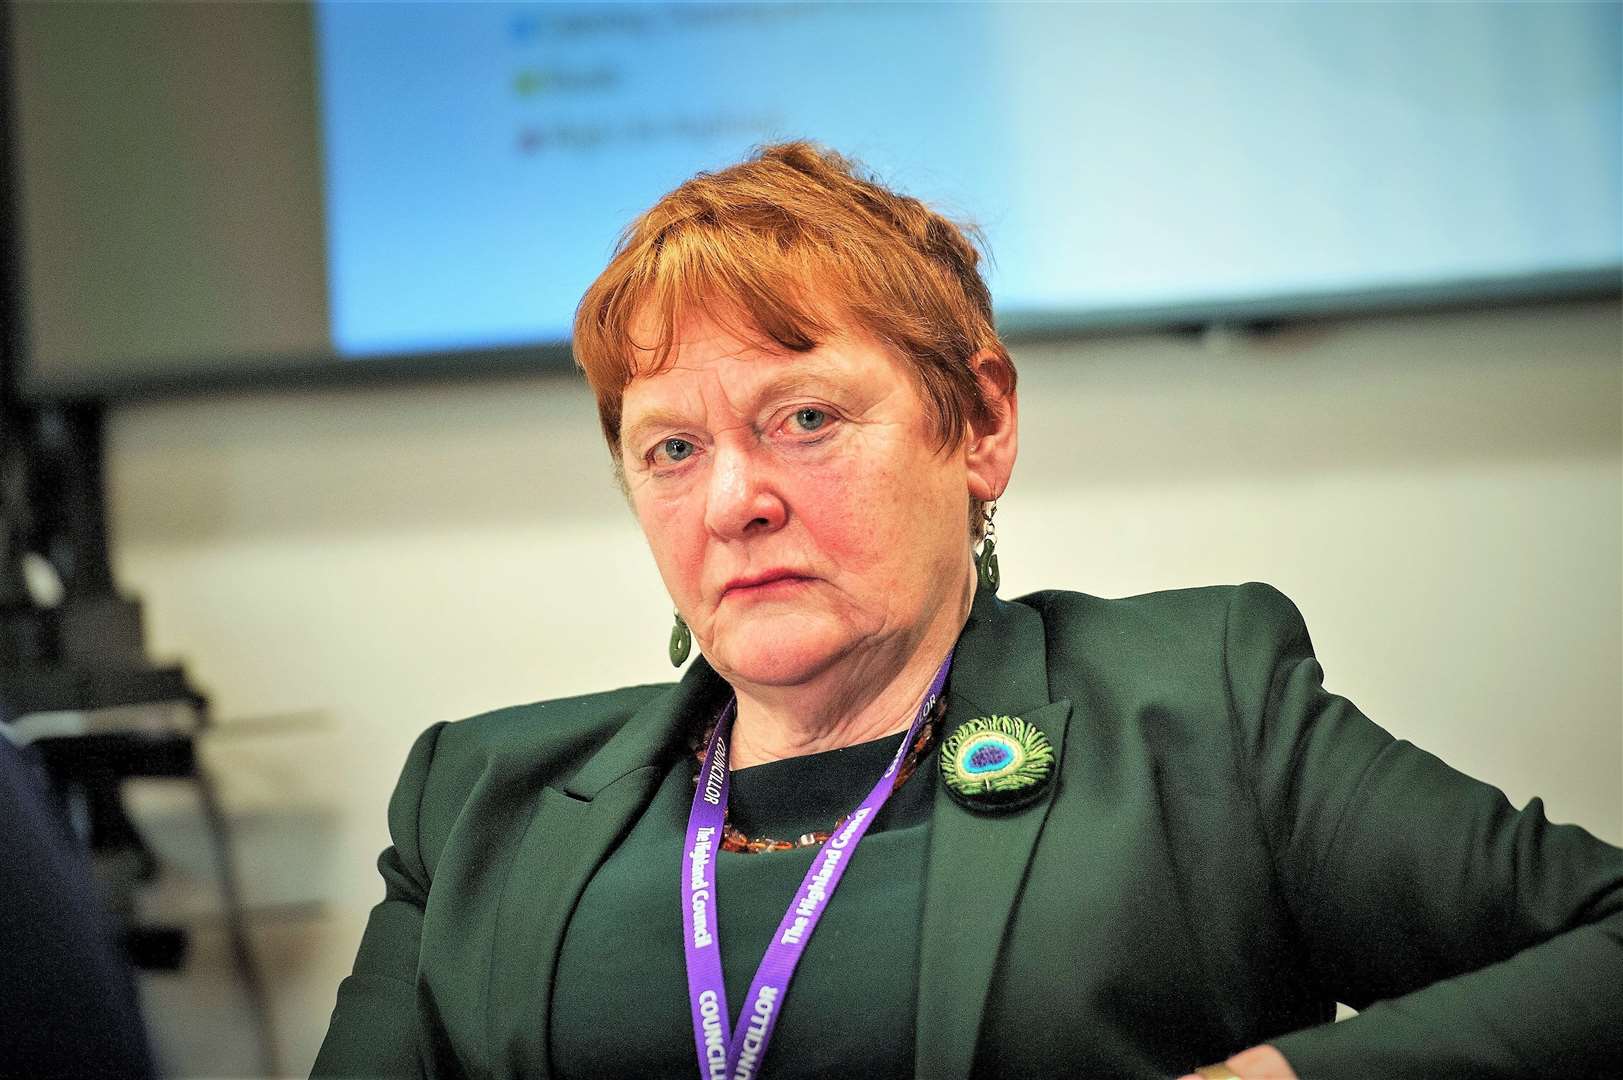 Council leader Margaret Davidson: 'Each percentage increase in council tax raises only £1.3 million of revenue, meaning that it would require an increase of some 30 per cent to close the gap, which we simply will not expect our communities to afford. This leaves us with no option but to reduce or cut core council services.'